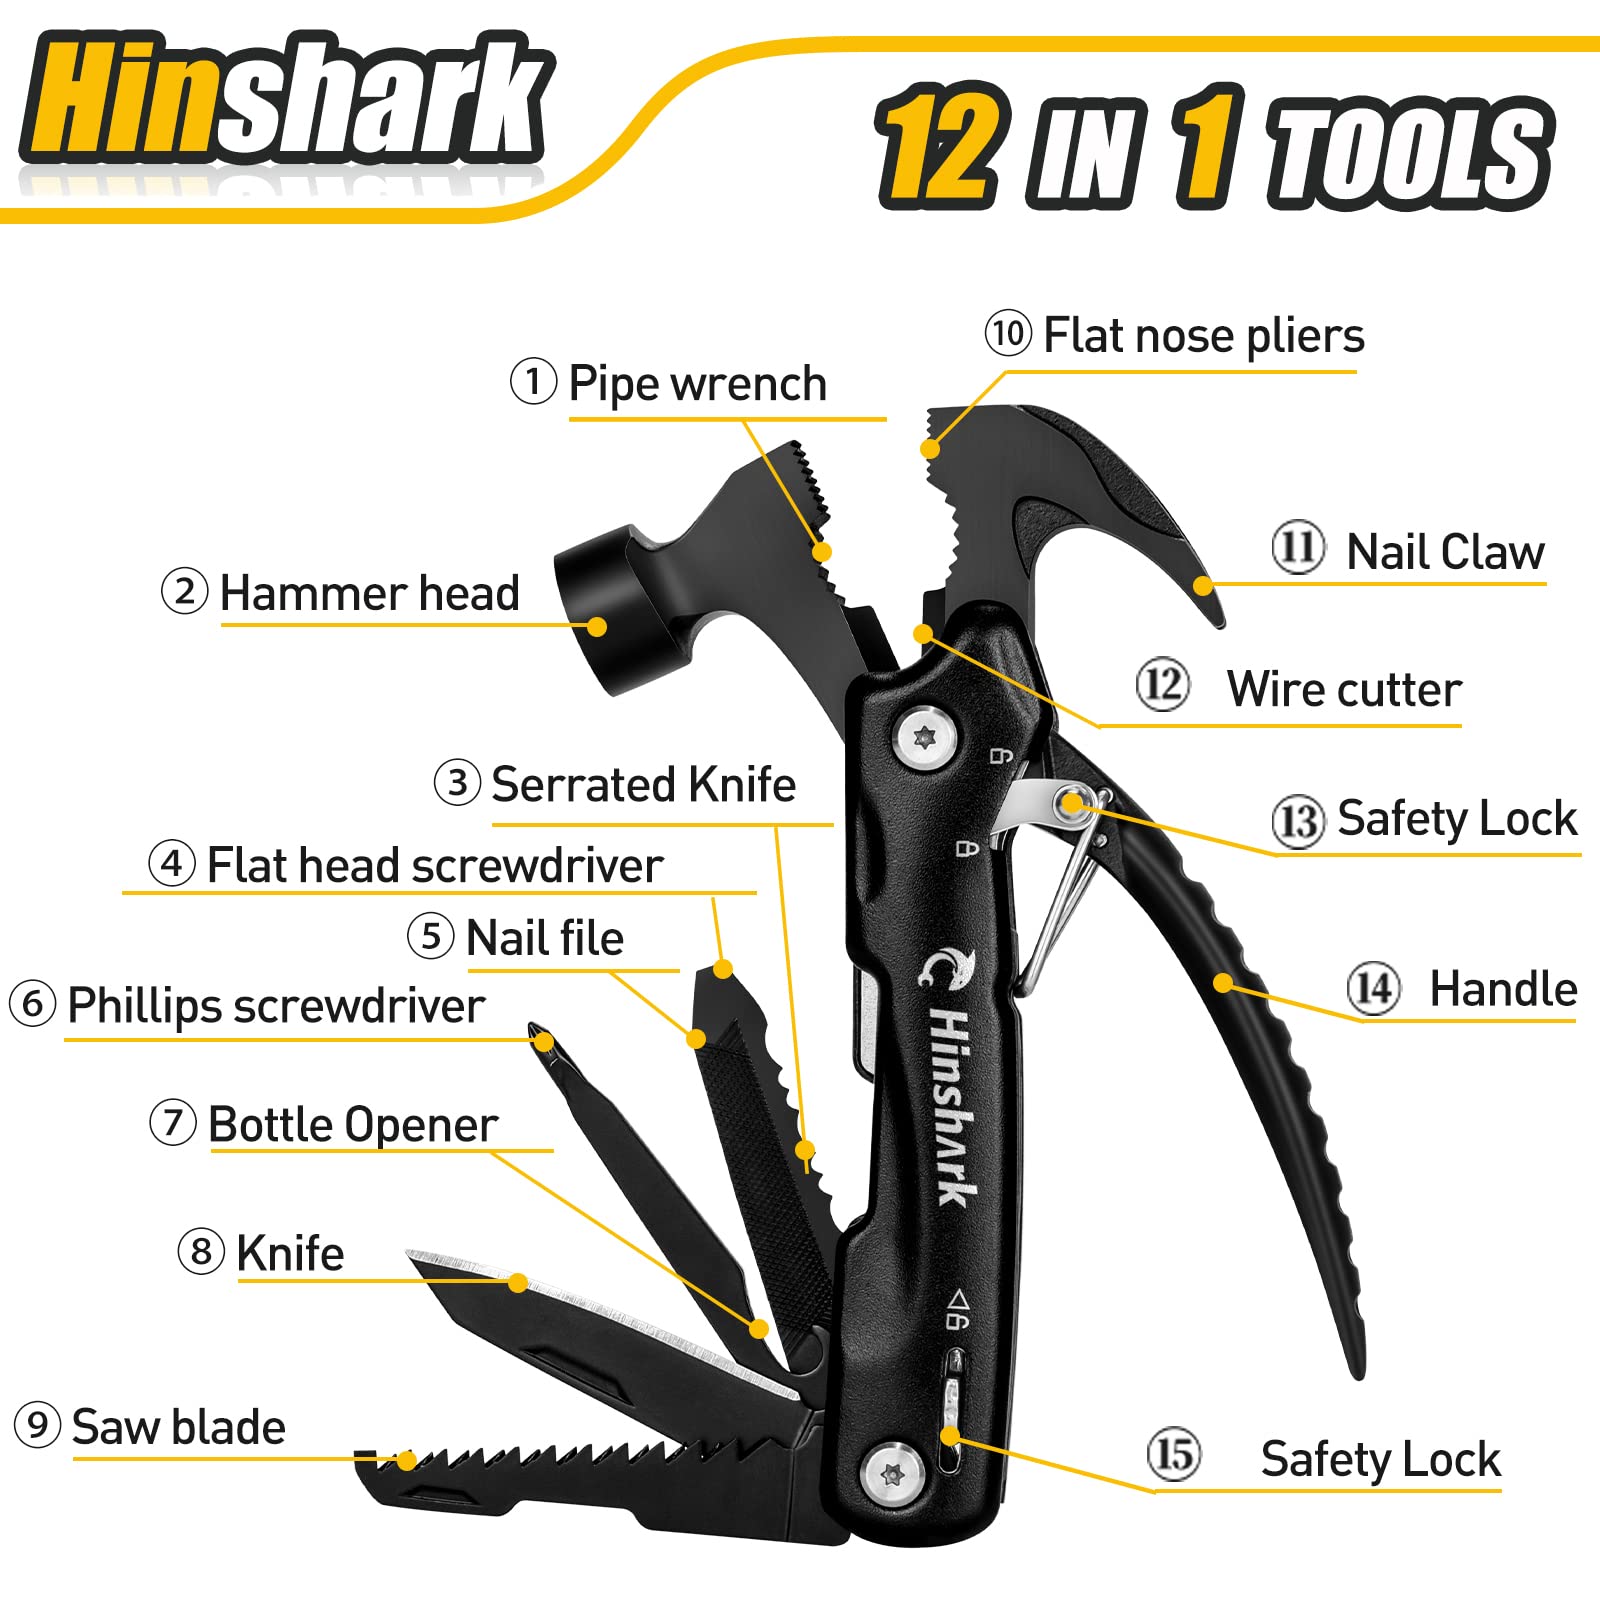 Hinshark Gifts for Men, Hammer Multitool Camping Accessories Cool Gadgets Tools for Men, Birthday Gifts for Him, Men, Dad, Boyfriend, Husband, Grandpa, Fathers Day Gift from Daughter